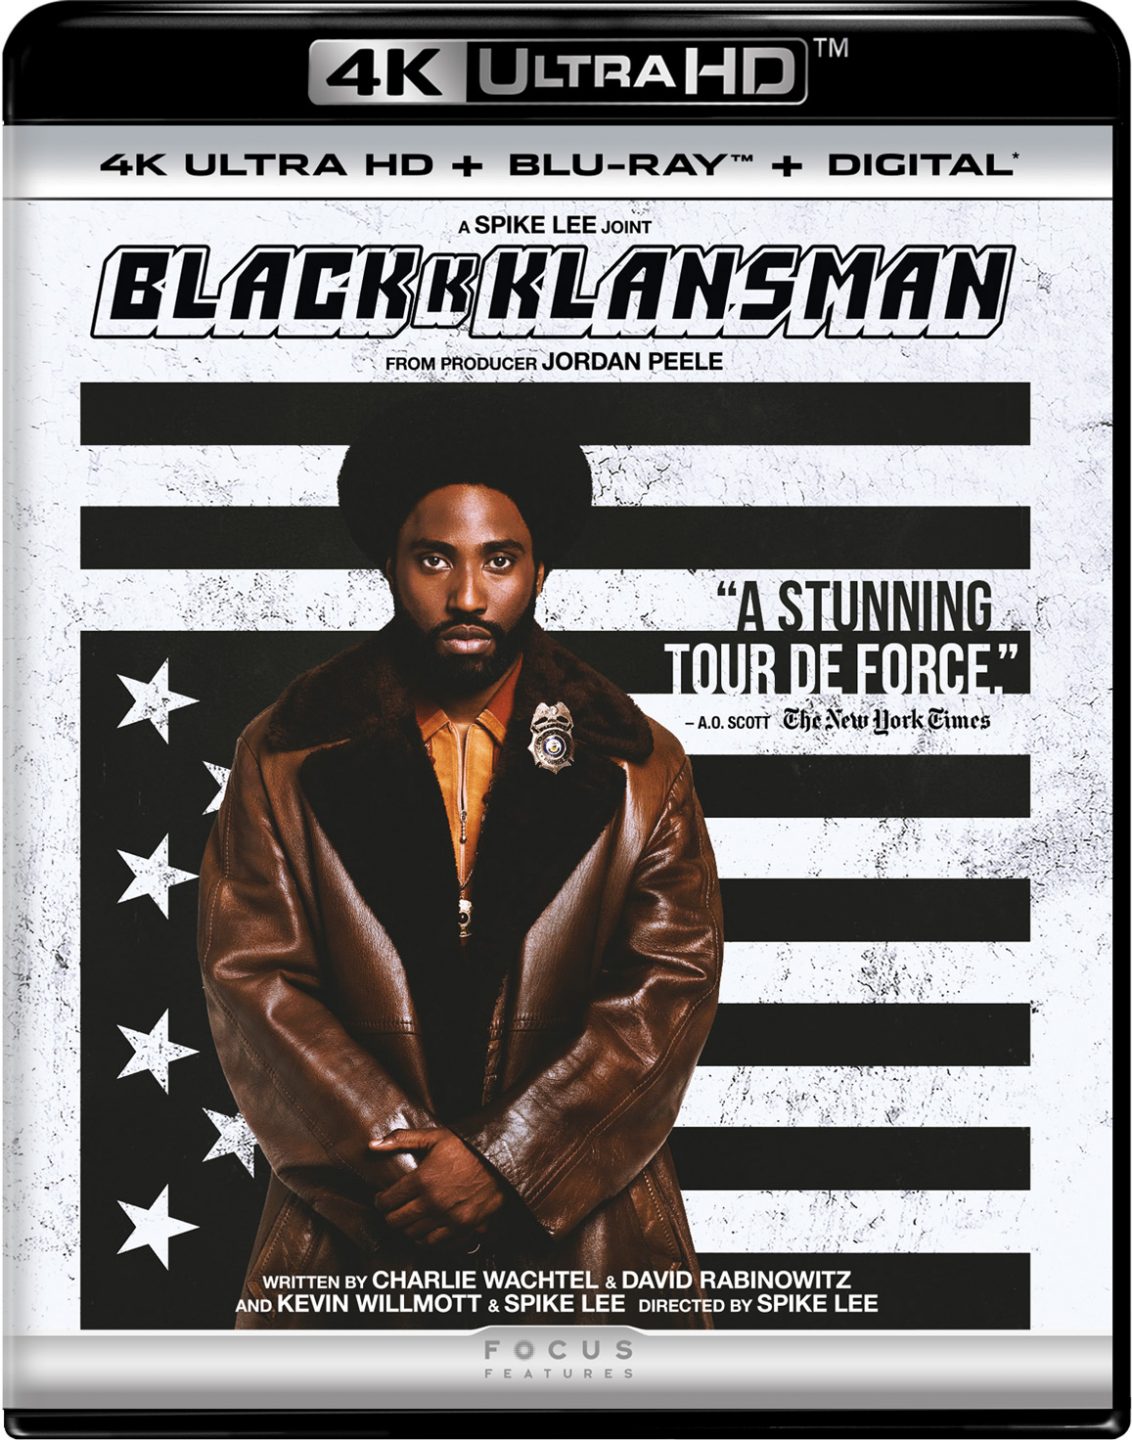 BKAKkKLANSMAN 4K Ultra HD Combo Pack cover (Universal Pictures Home Entertainment)